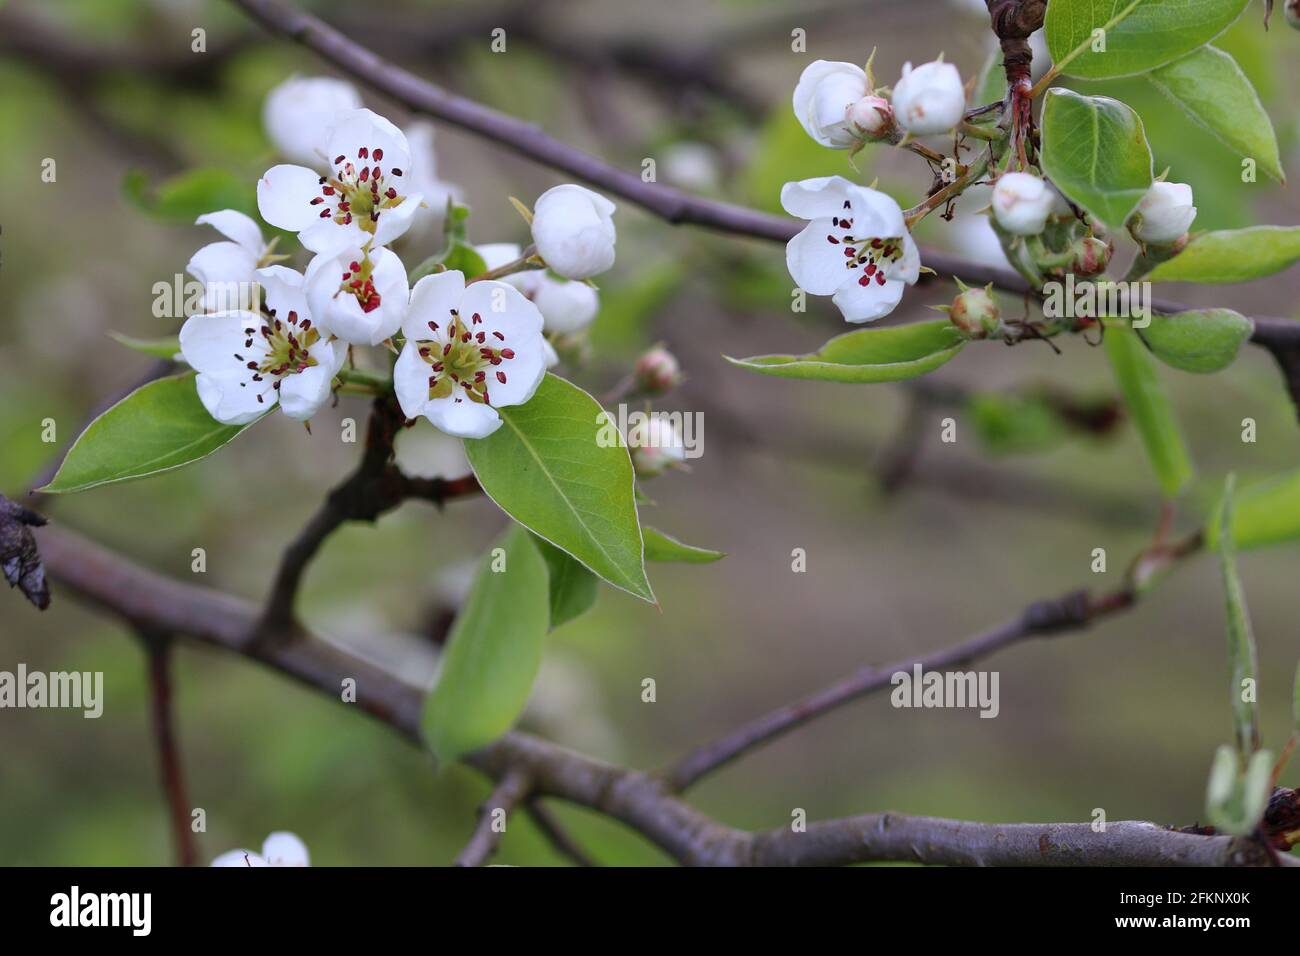 close up of cherry blossom on a twig Stock Photo